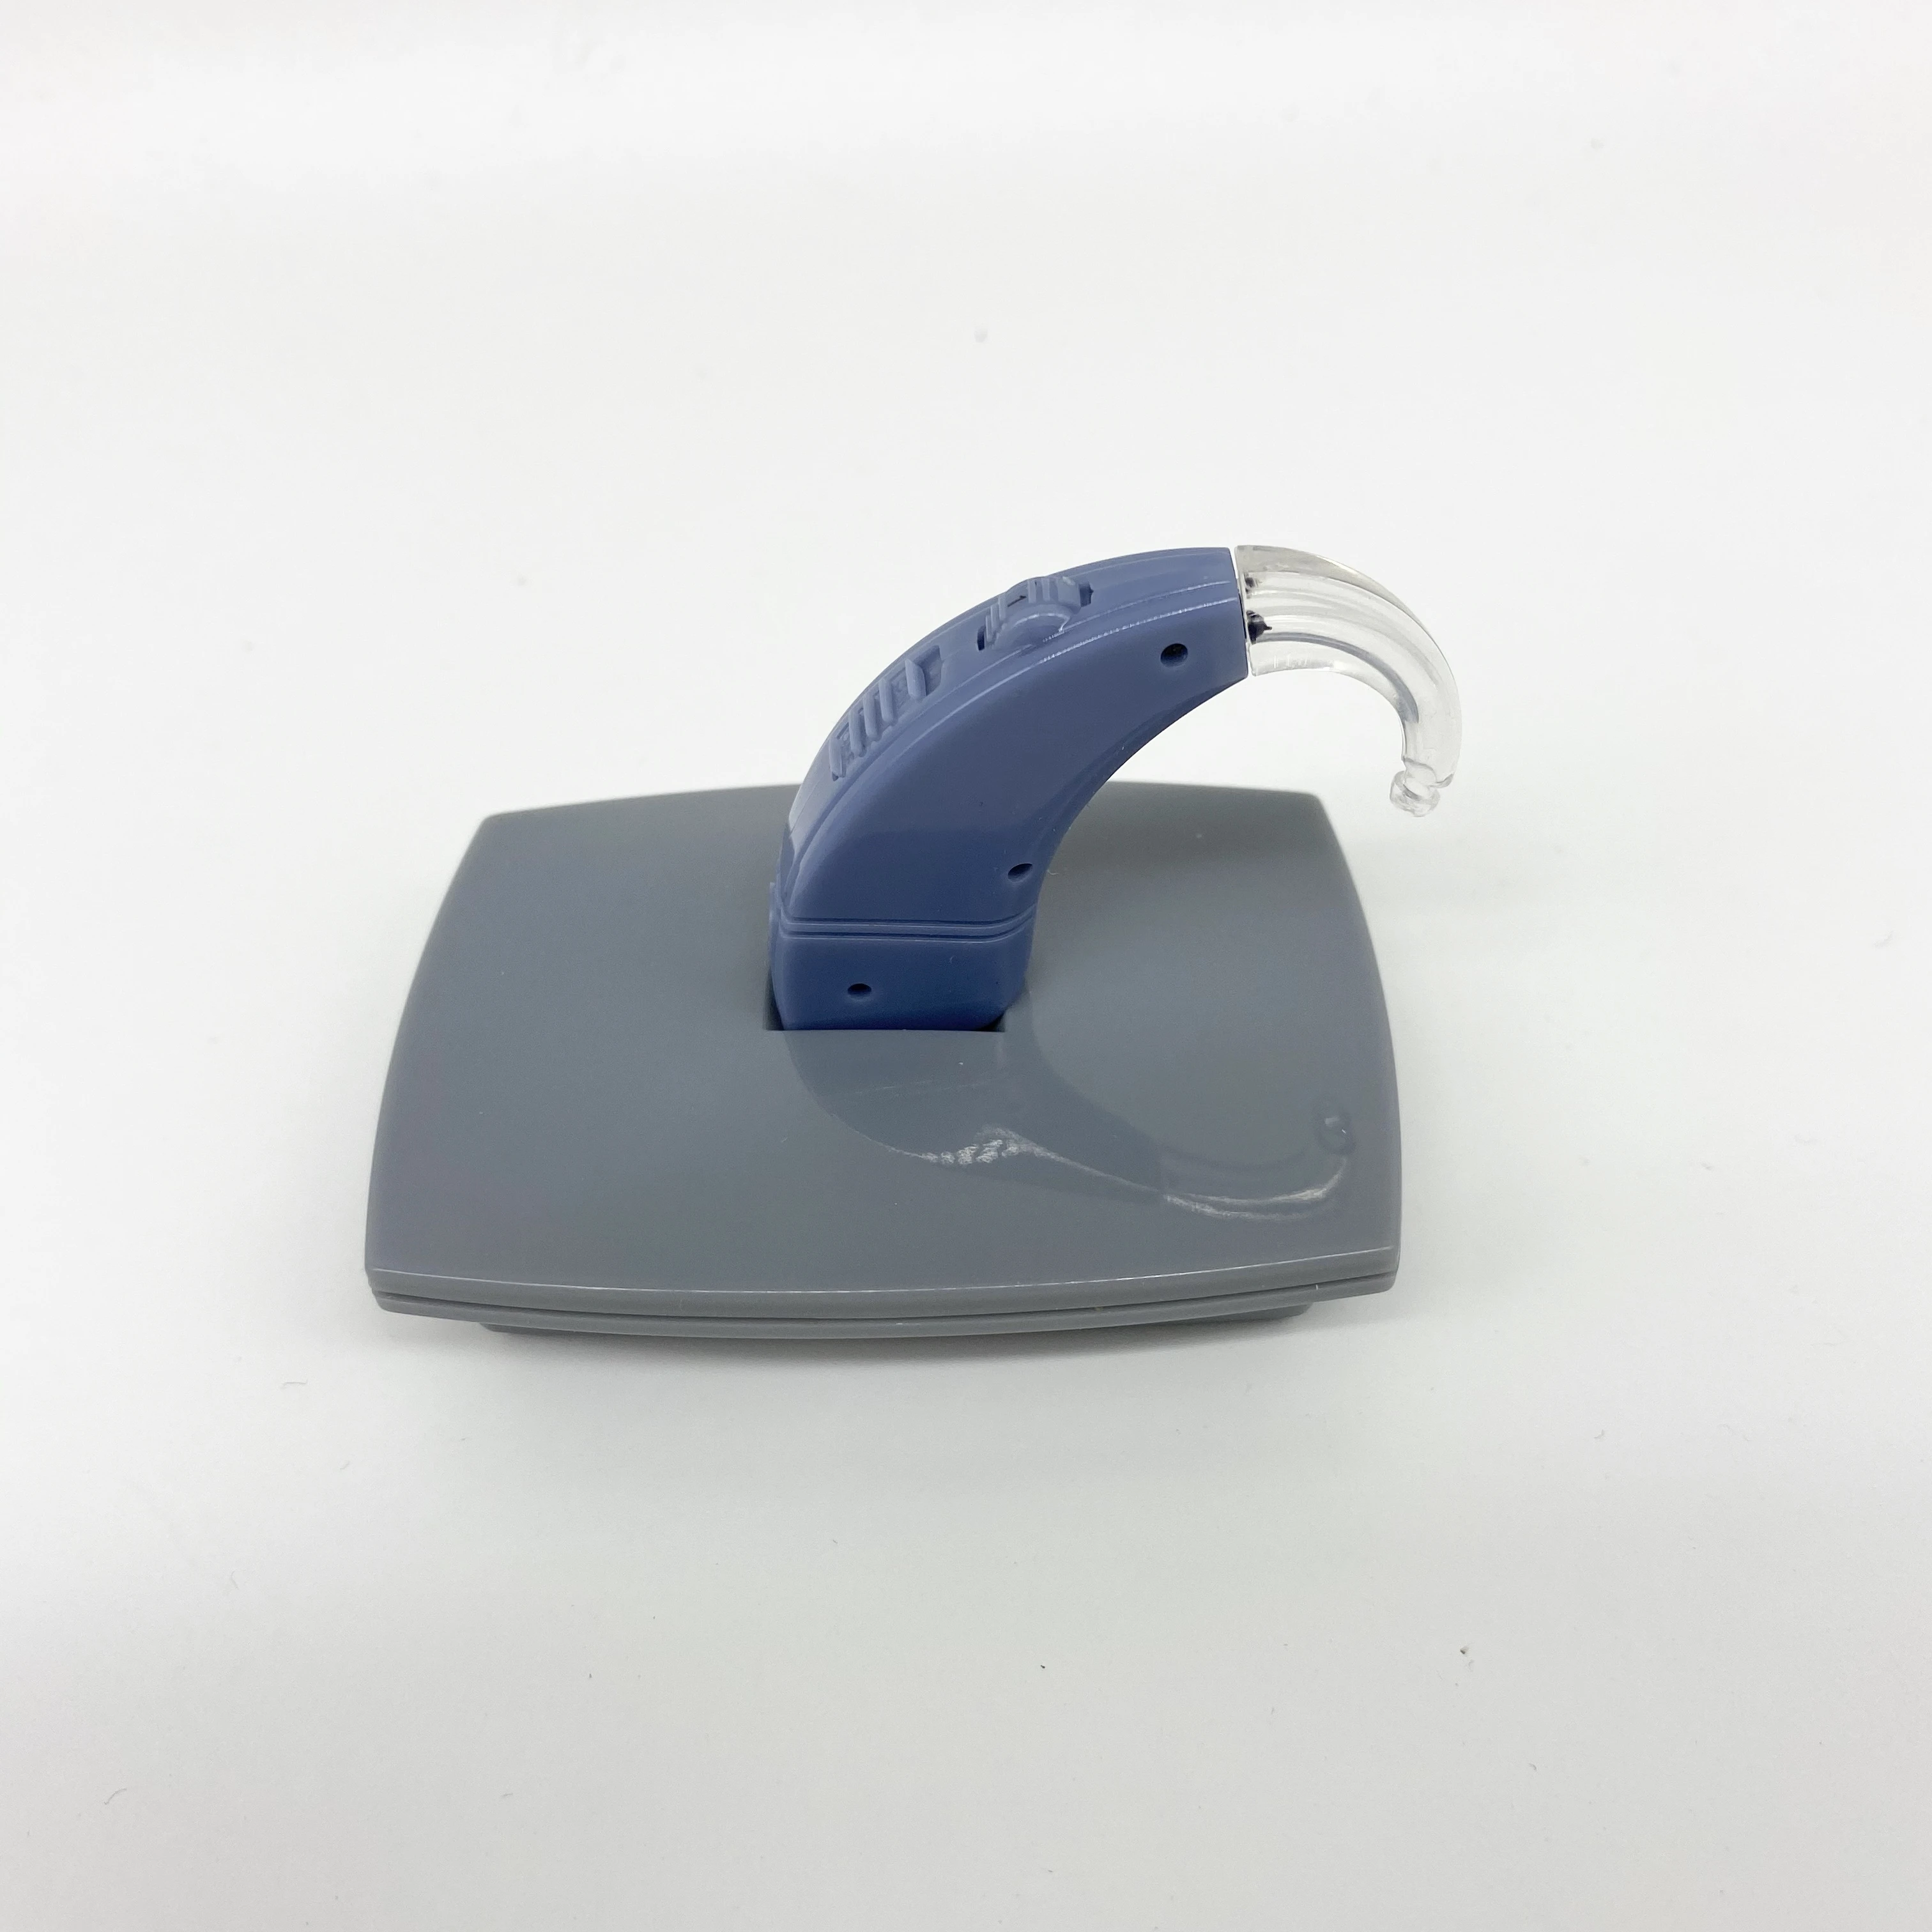 Hearing Aids With Storage Case Rechargeable Hearing Aid Re-sound In Ear Hearing Aid Protect